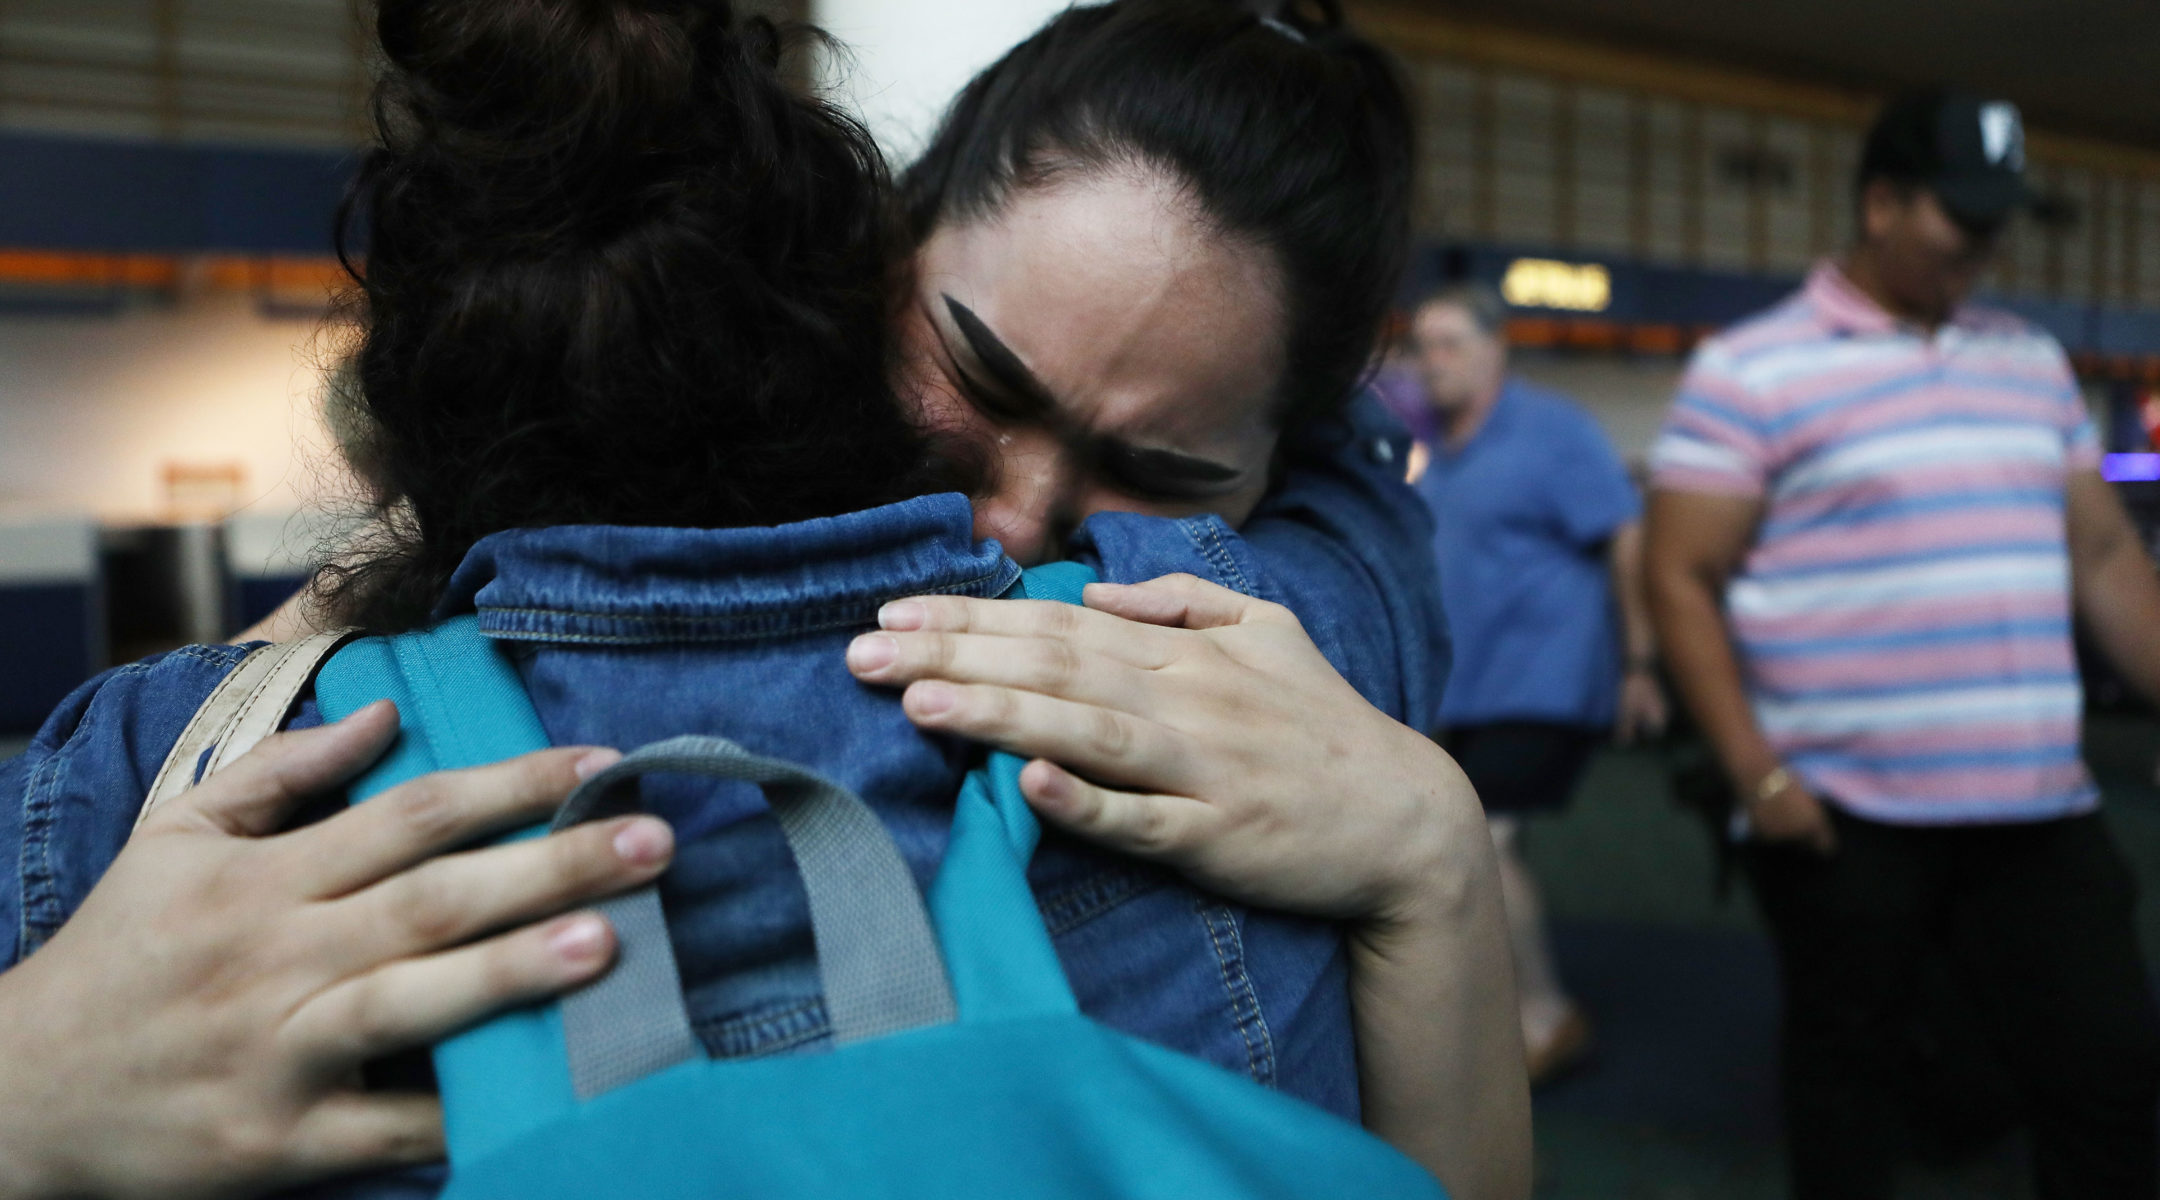 An immigrant recently released after spending six months in an ICE detention facility, is hugged by her daughter while being reunited with family at Portland International Airport on September 2, 2018. (Mario Tama/Getty Images)